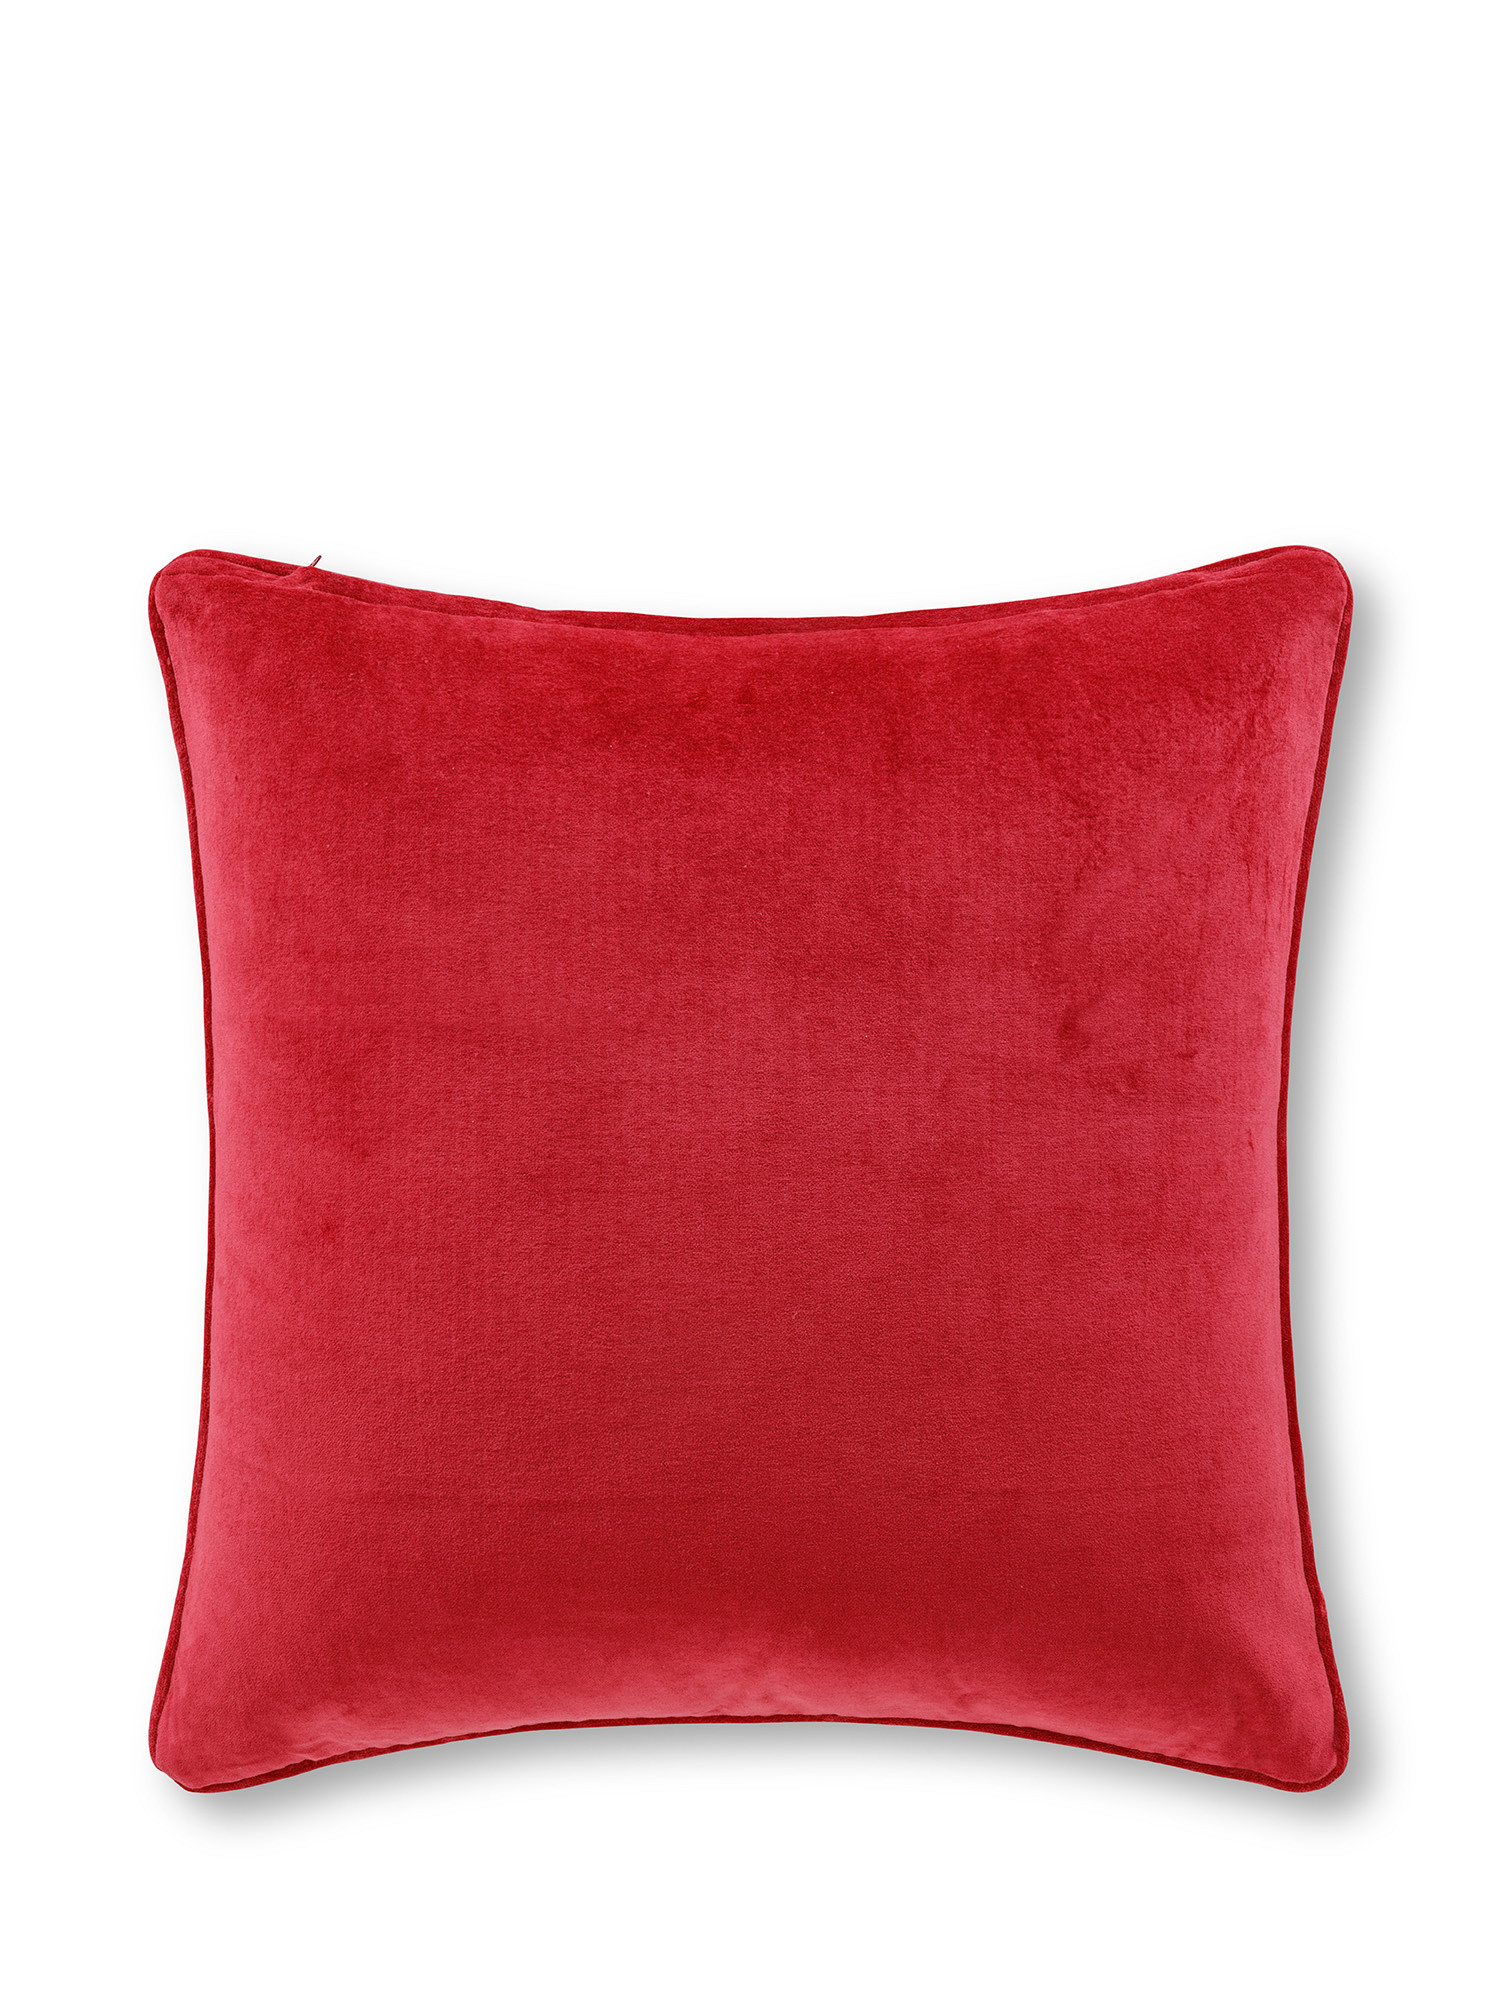 Velvet cushion with stars embroidered in lurex 45x45 cm, Red, large image number 1